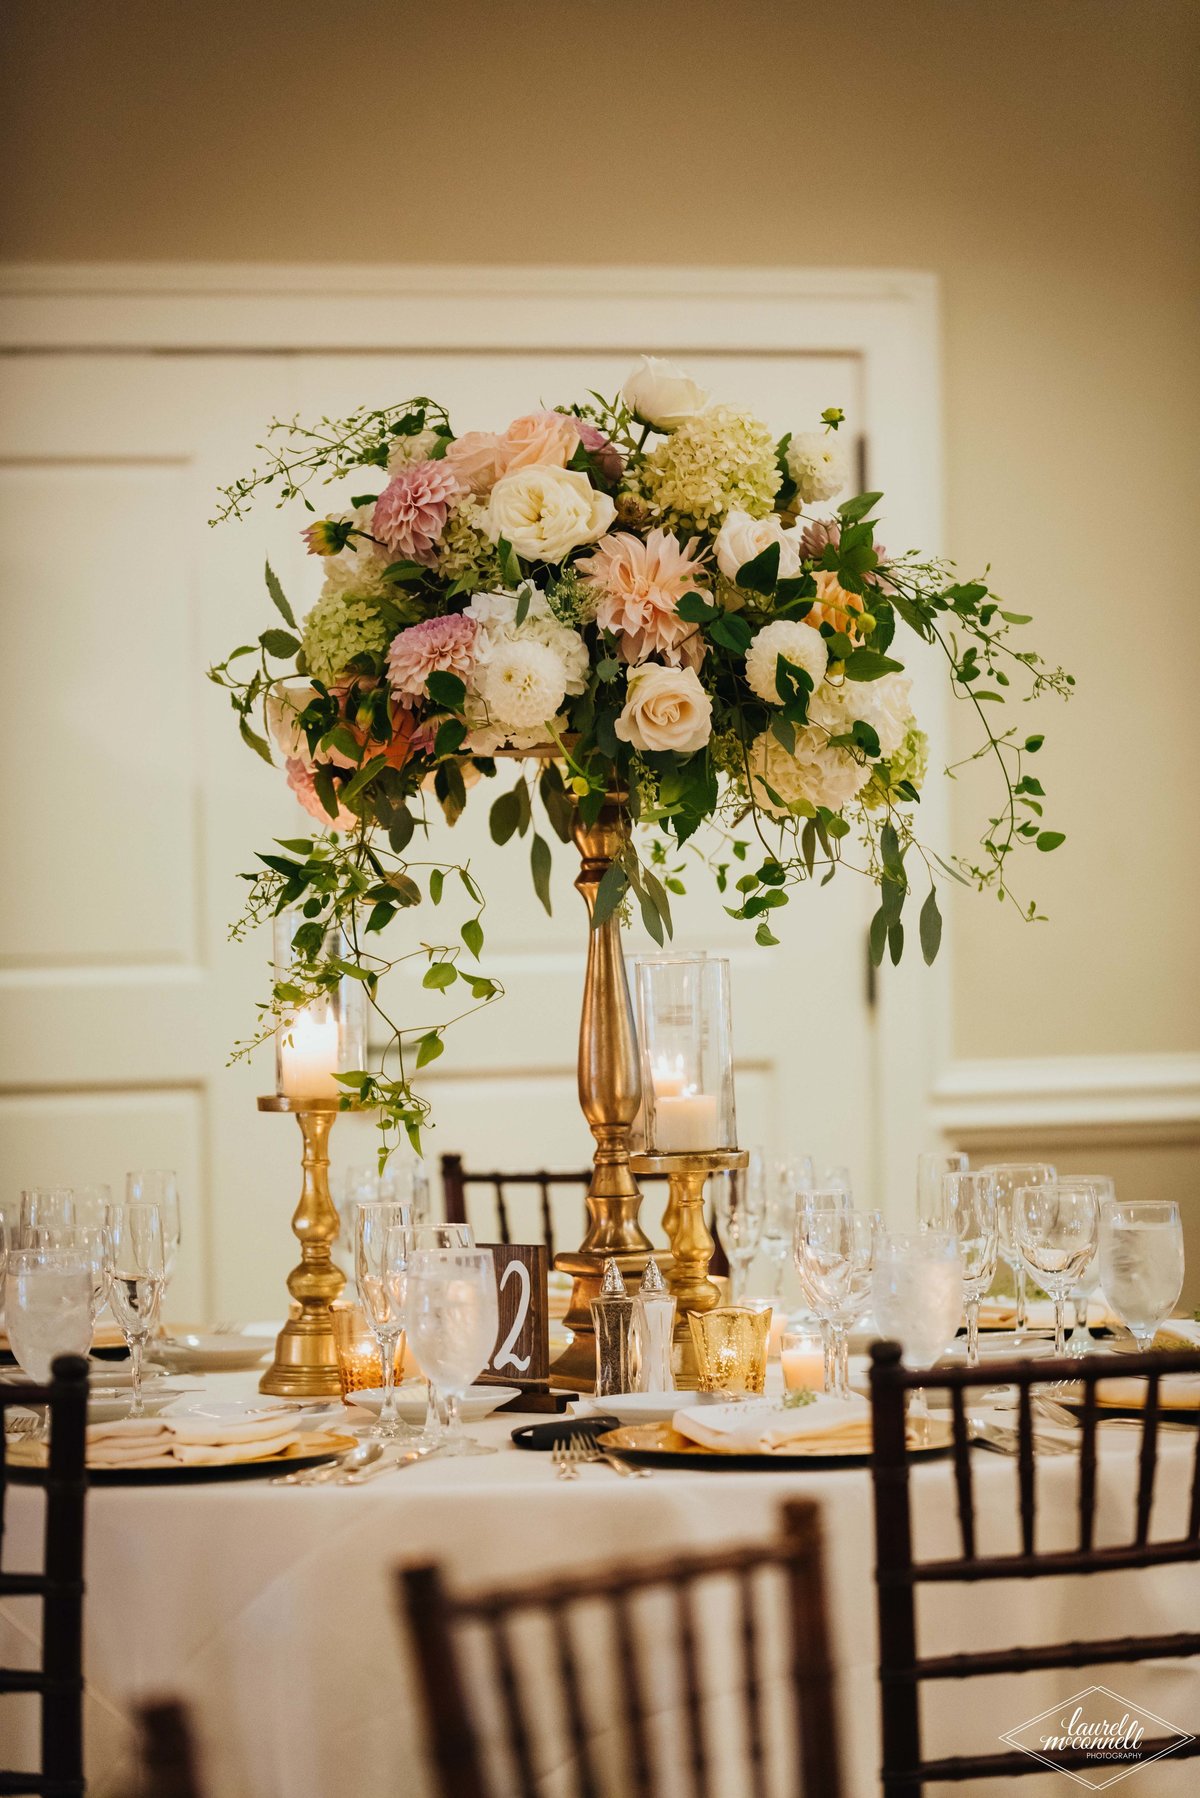 elevated centerpiece of cafe au lait dahlias, peach and ivory roses, smilax greenery, and raspberry foliage on table with ivory linens, gold candle holders, and brown Chivari chairs